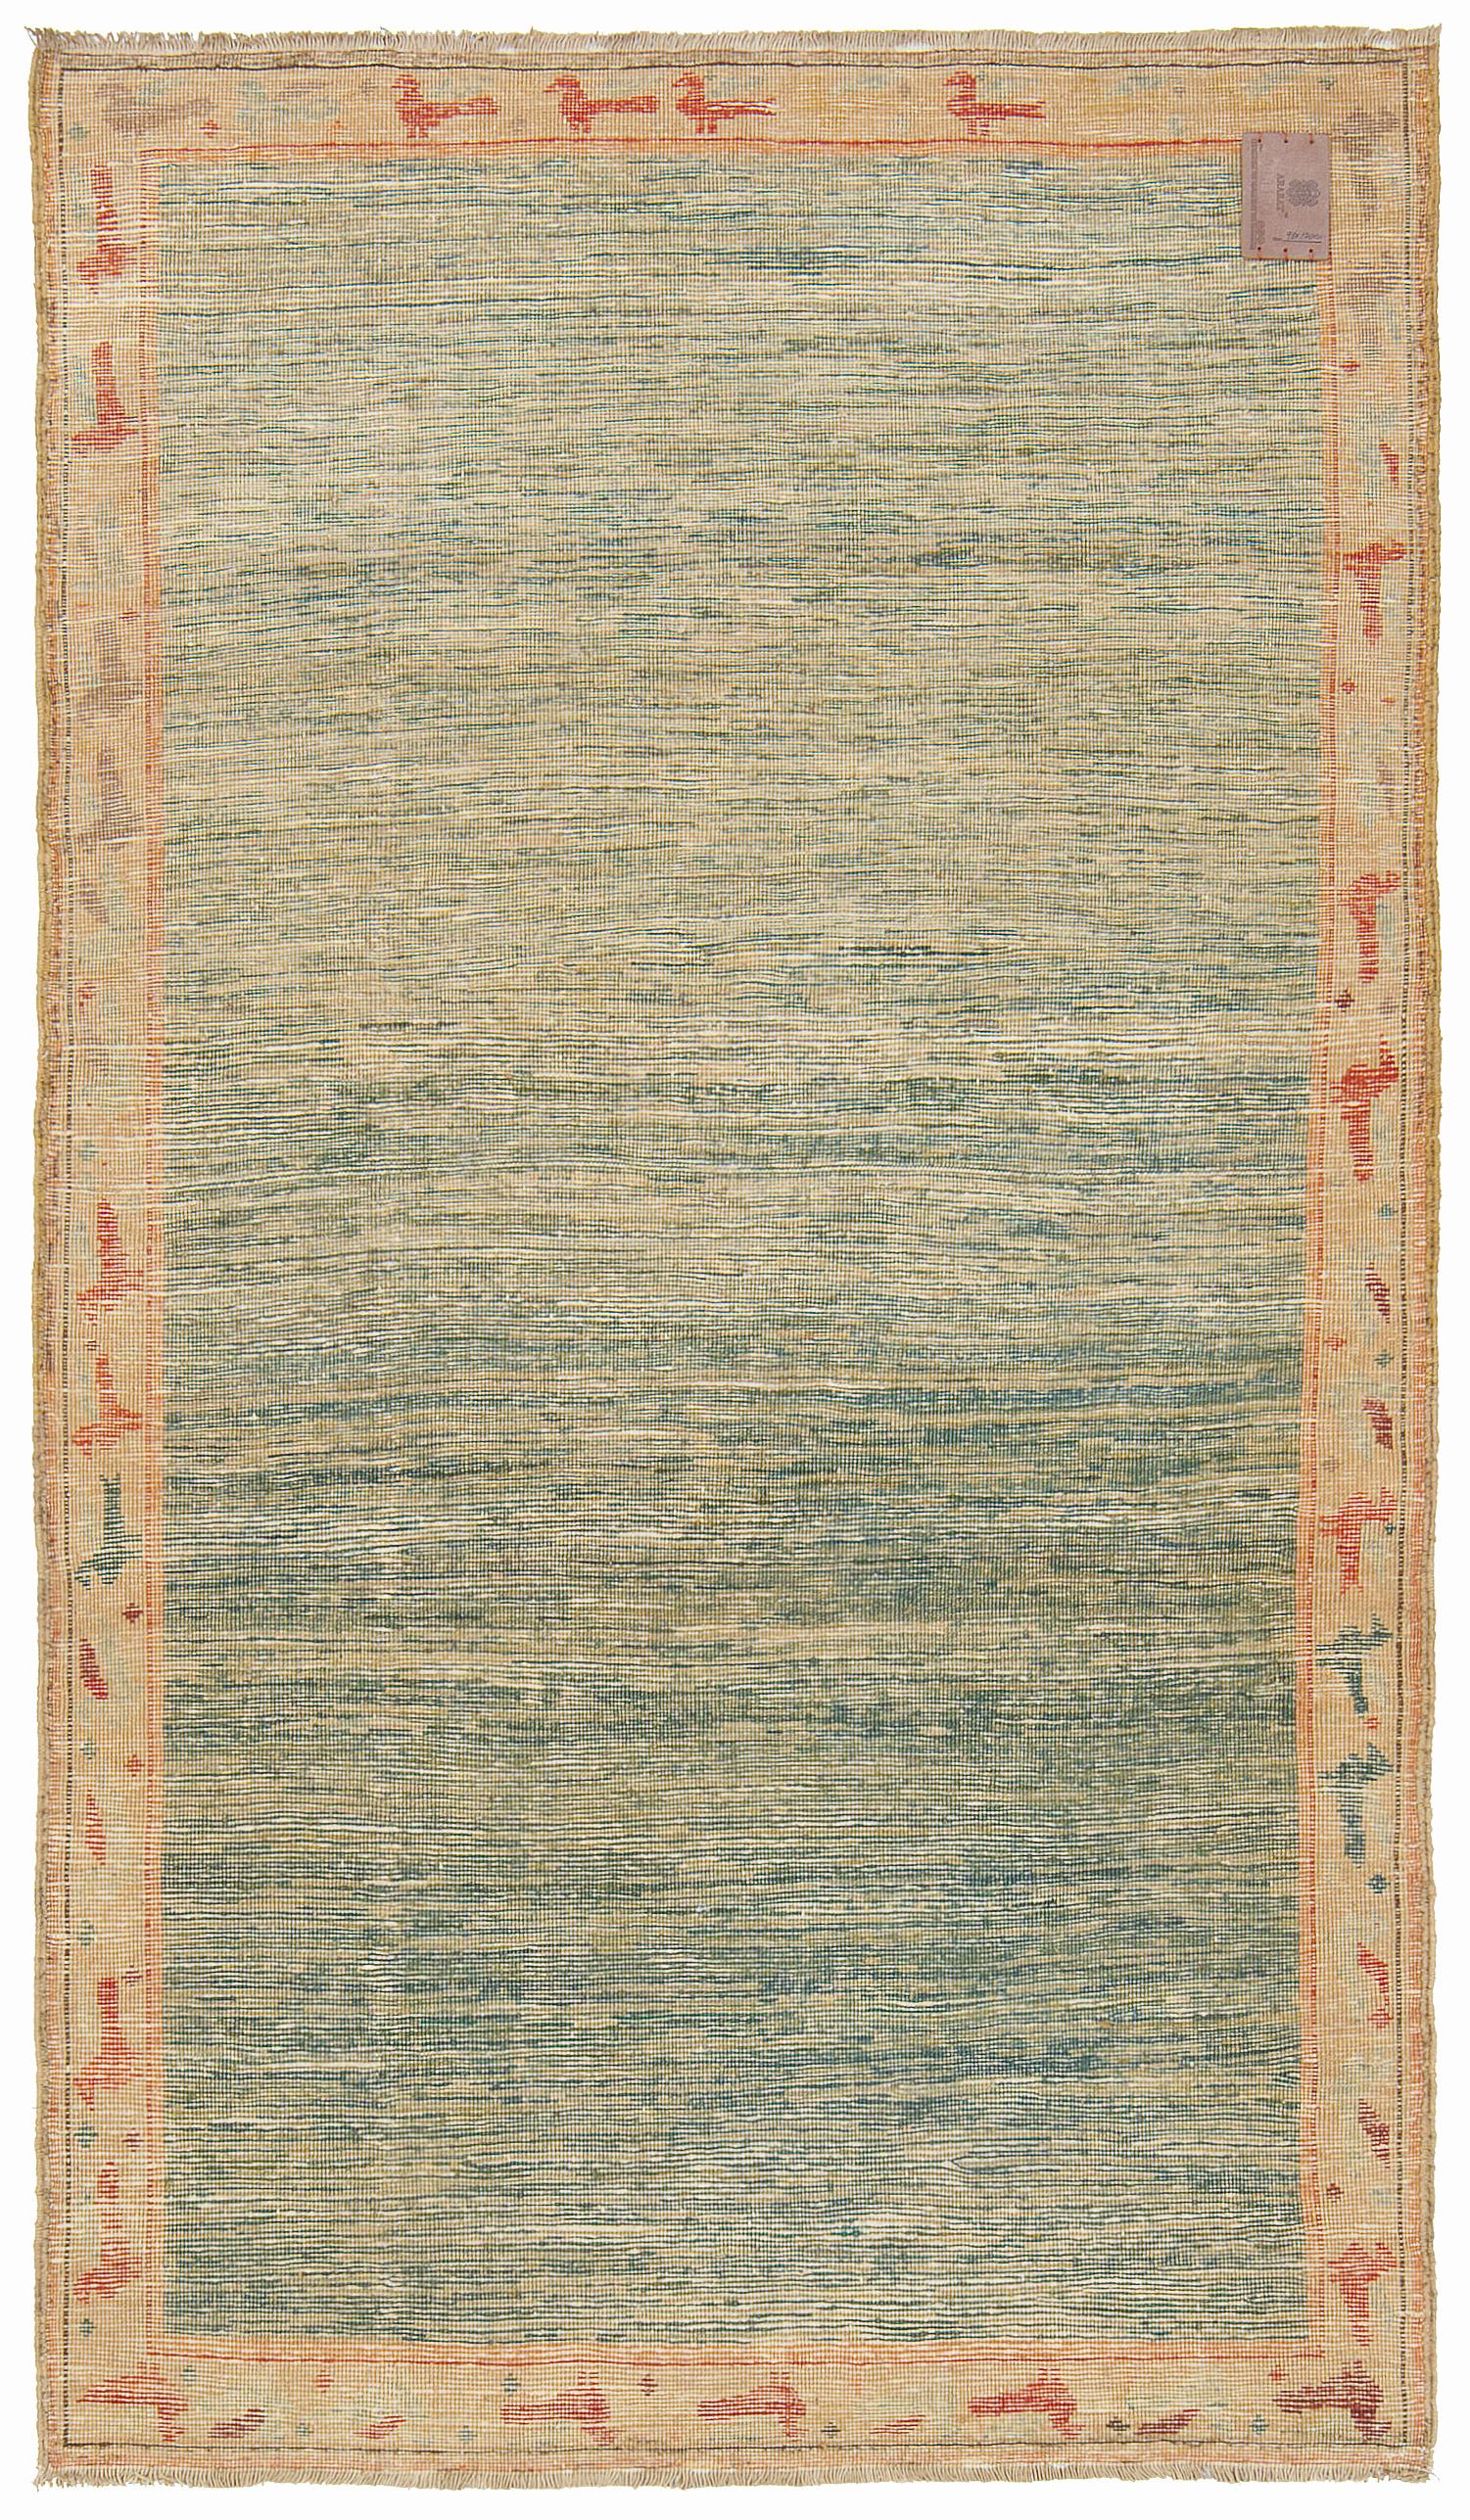 This unique design rug is interpreted by our designers with a mixture of Ararat Rugs’ soft green tone natural dyed hand-spun yarns. This modern rug is reminiscent of a scene in impressionist river paintings, framed with colorful birds.

Color